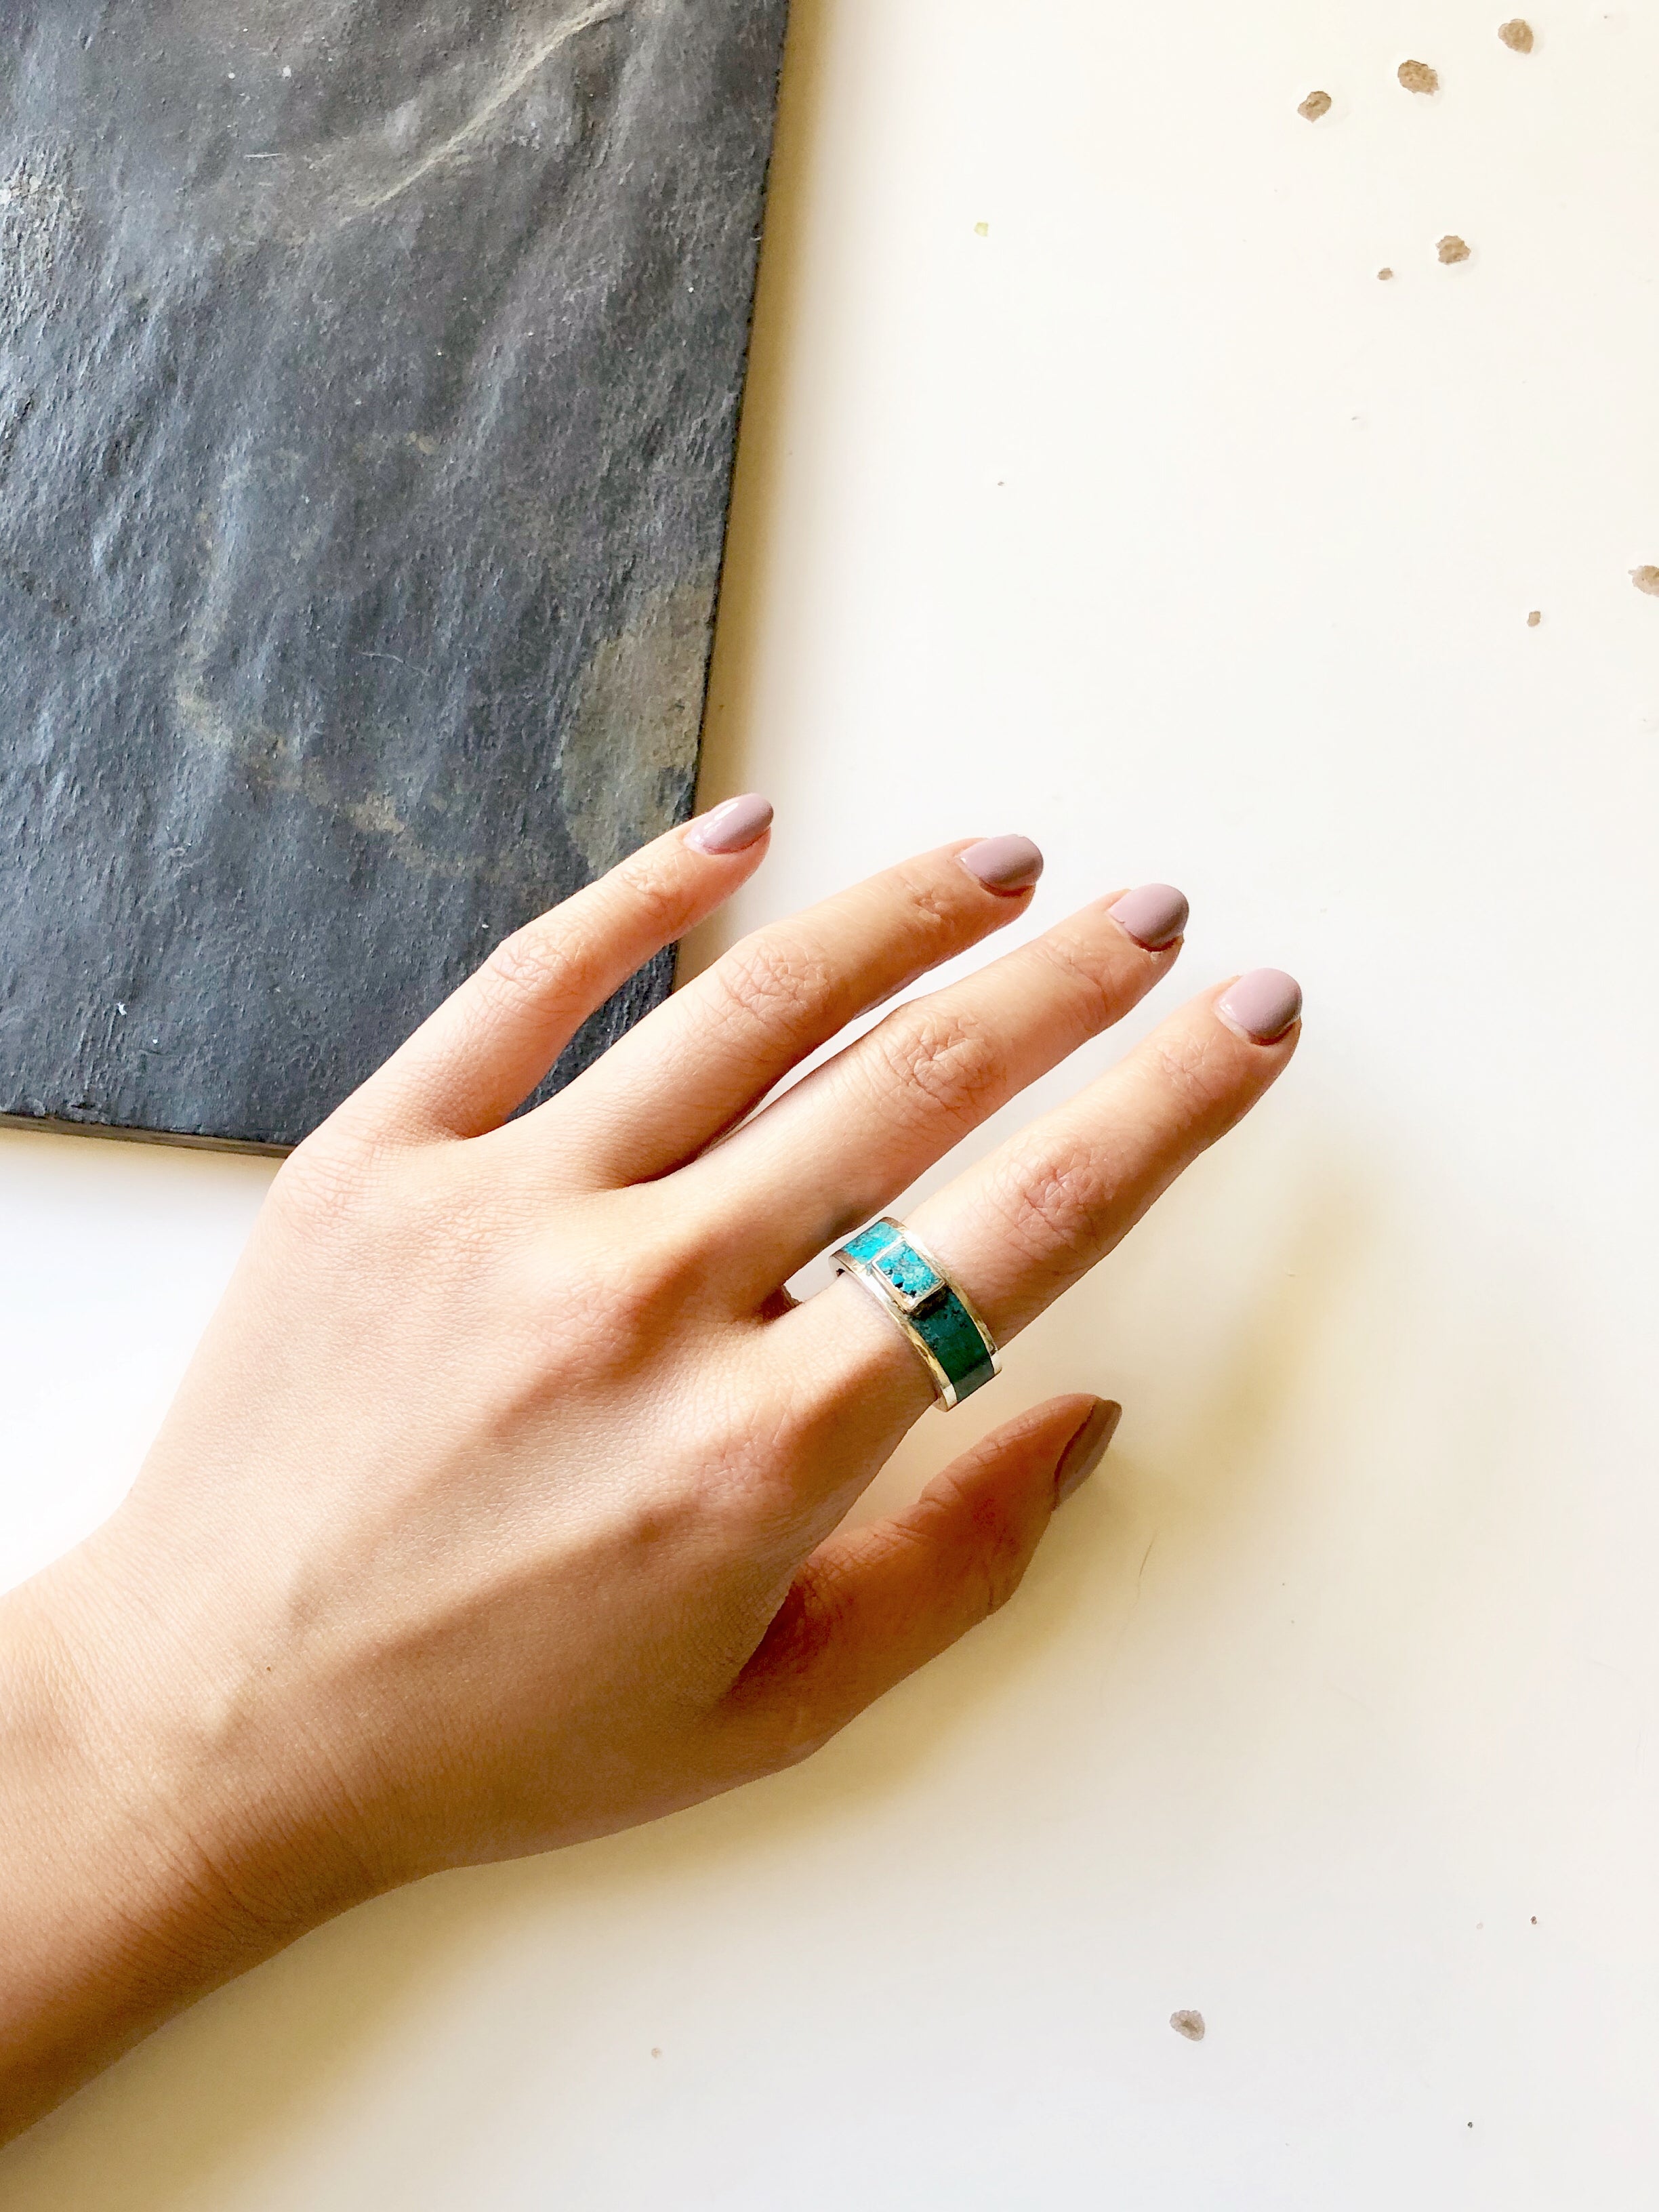 one-of-a-kind Rectangle Turquoise Silver Ring